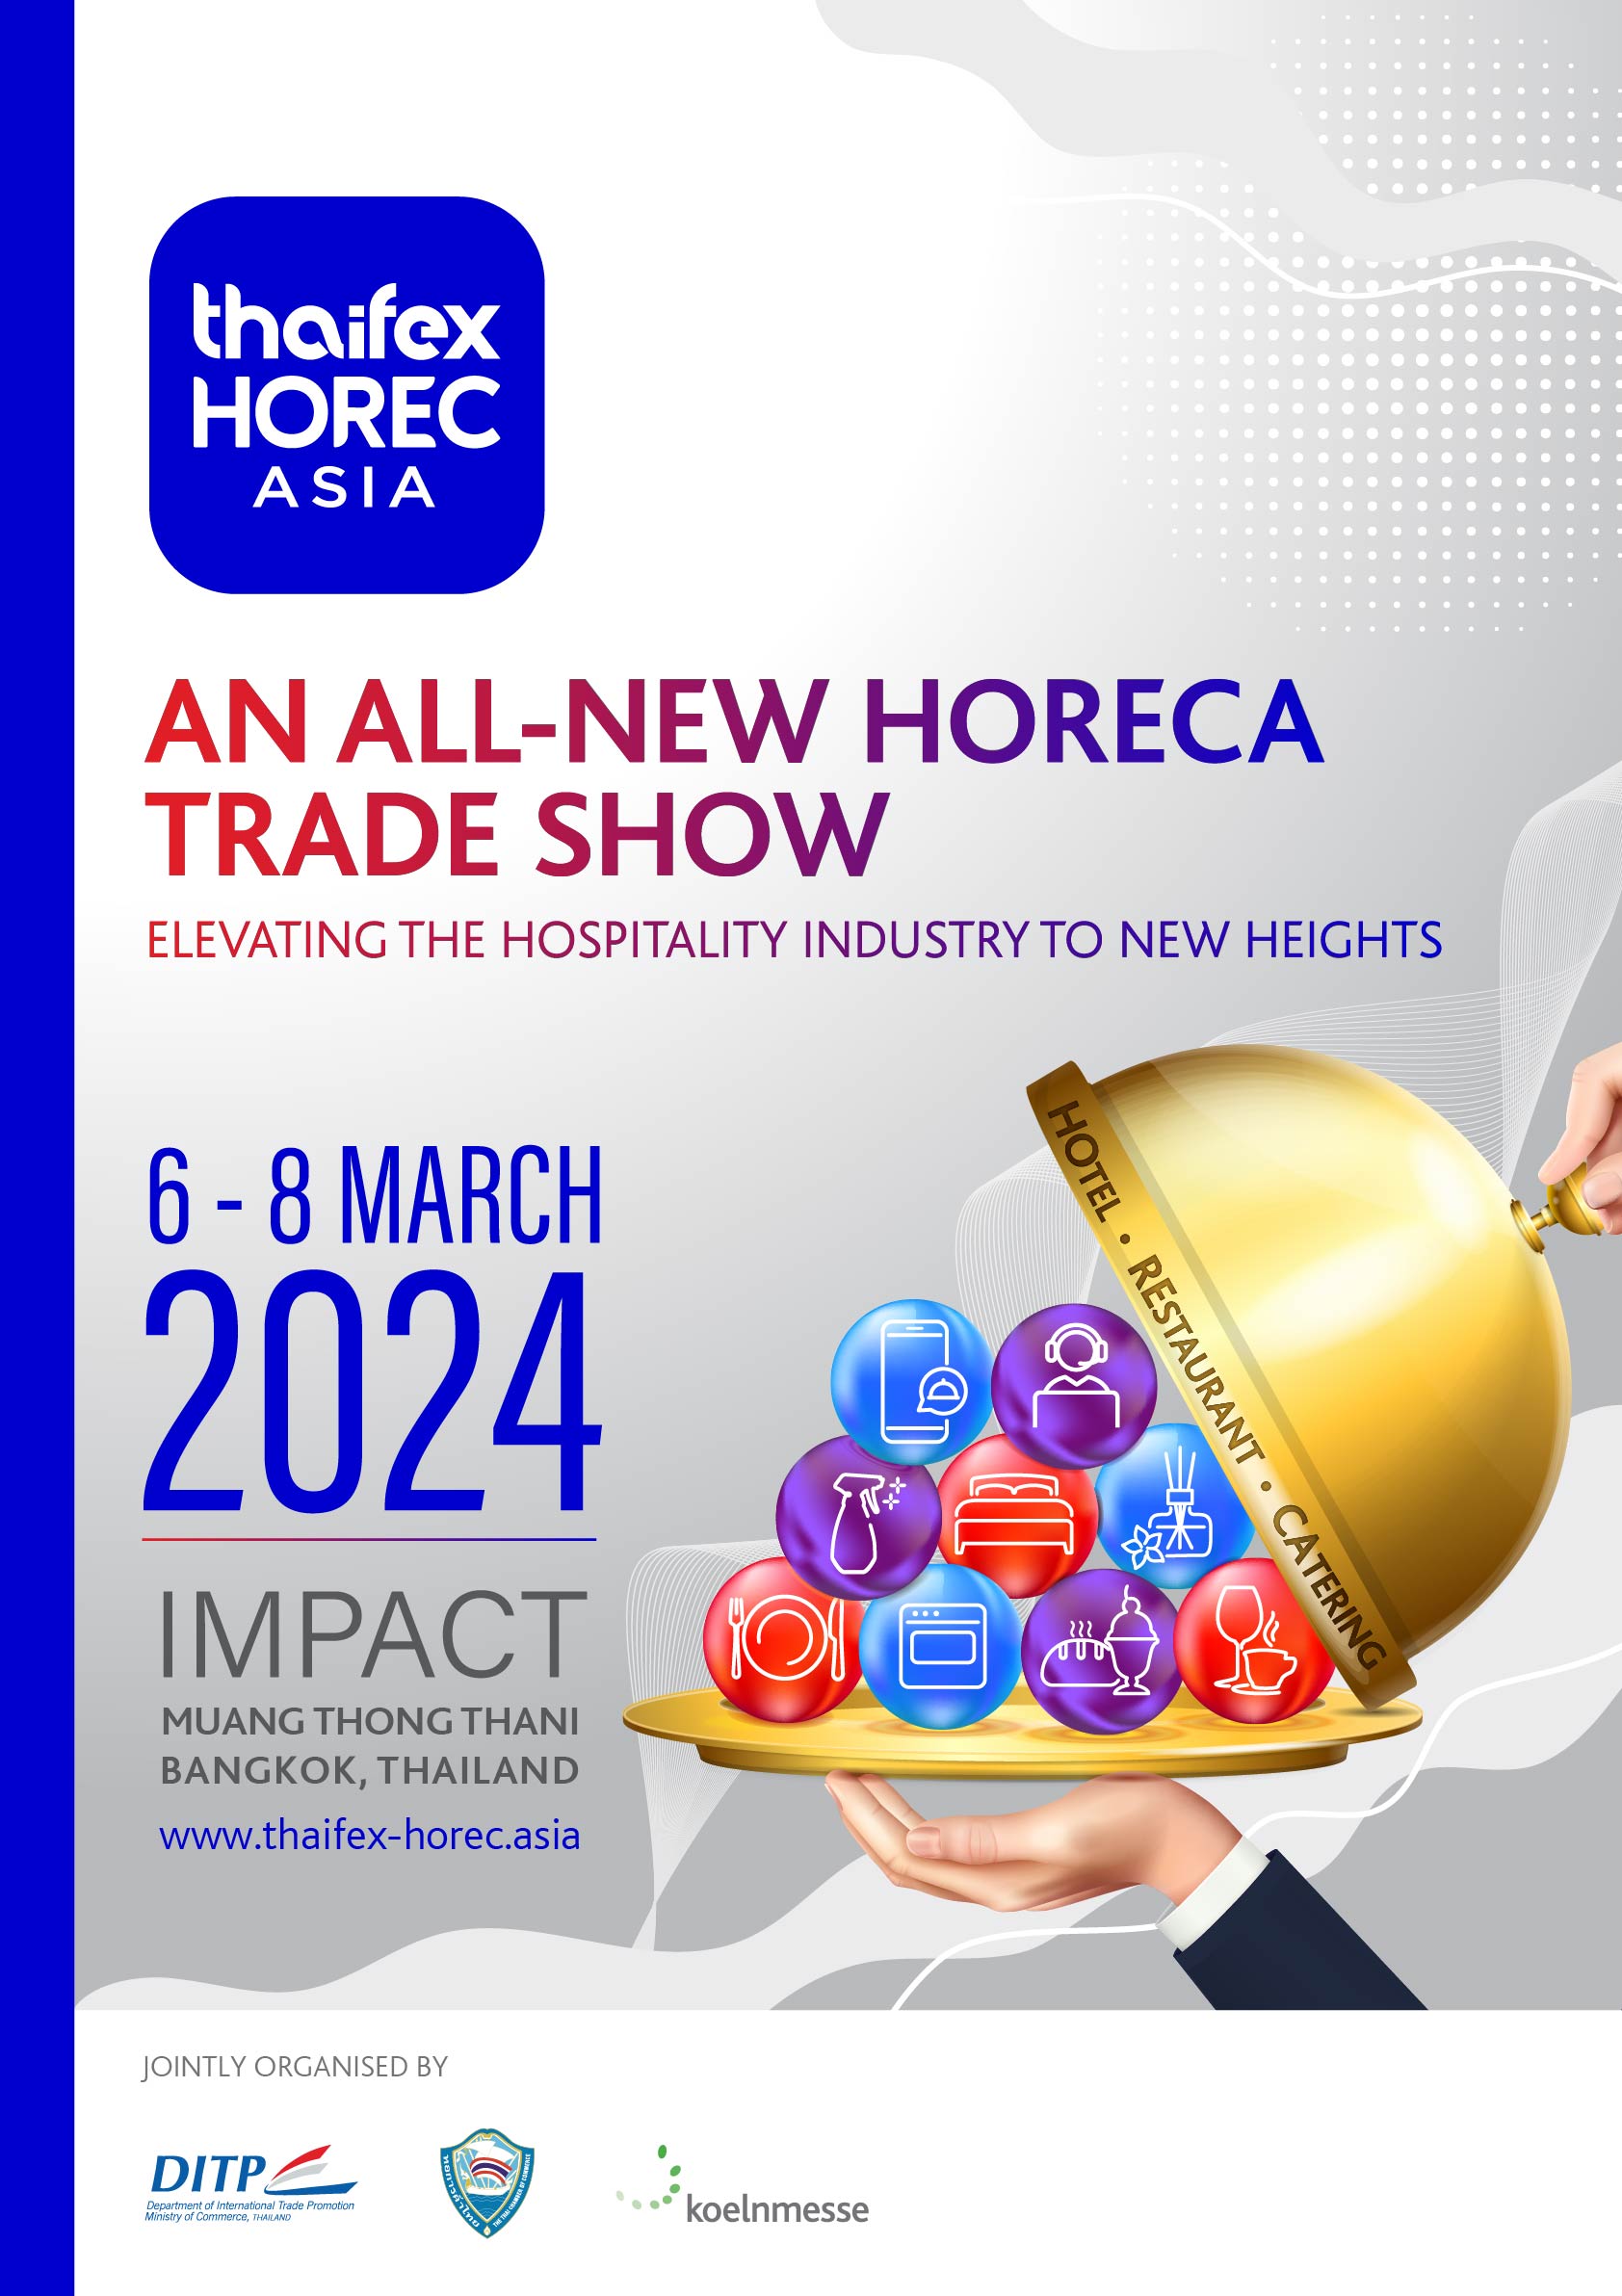 THAIFEX – HOREC Asia to make its debut in 2024